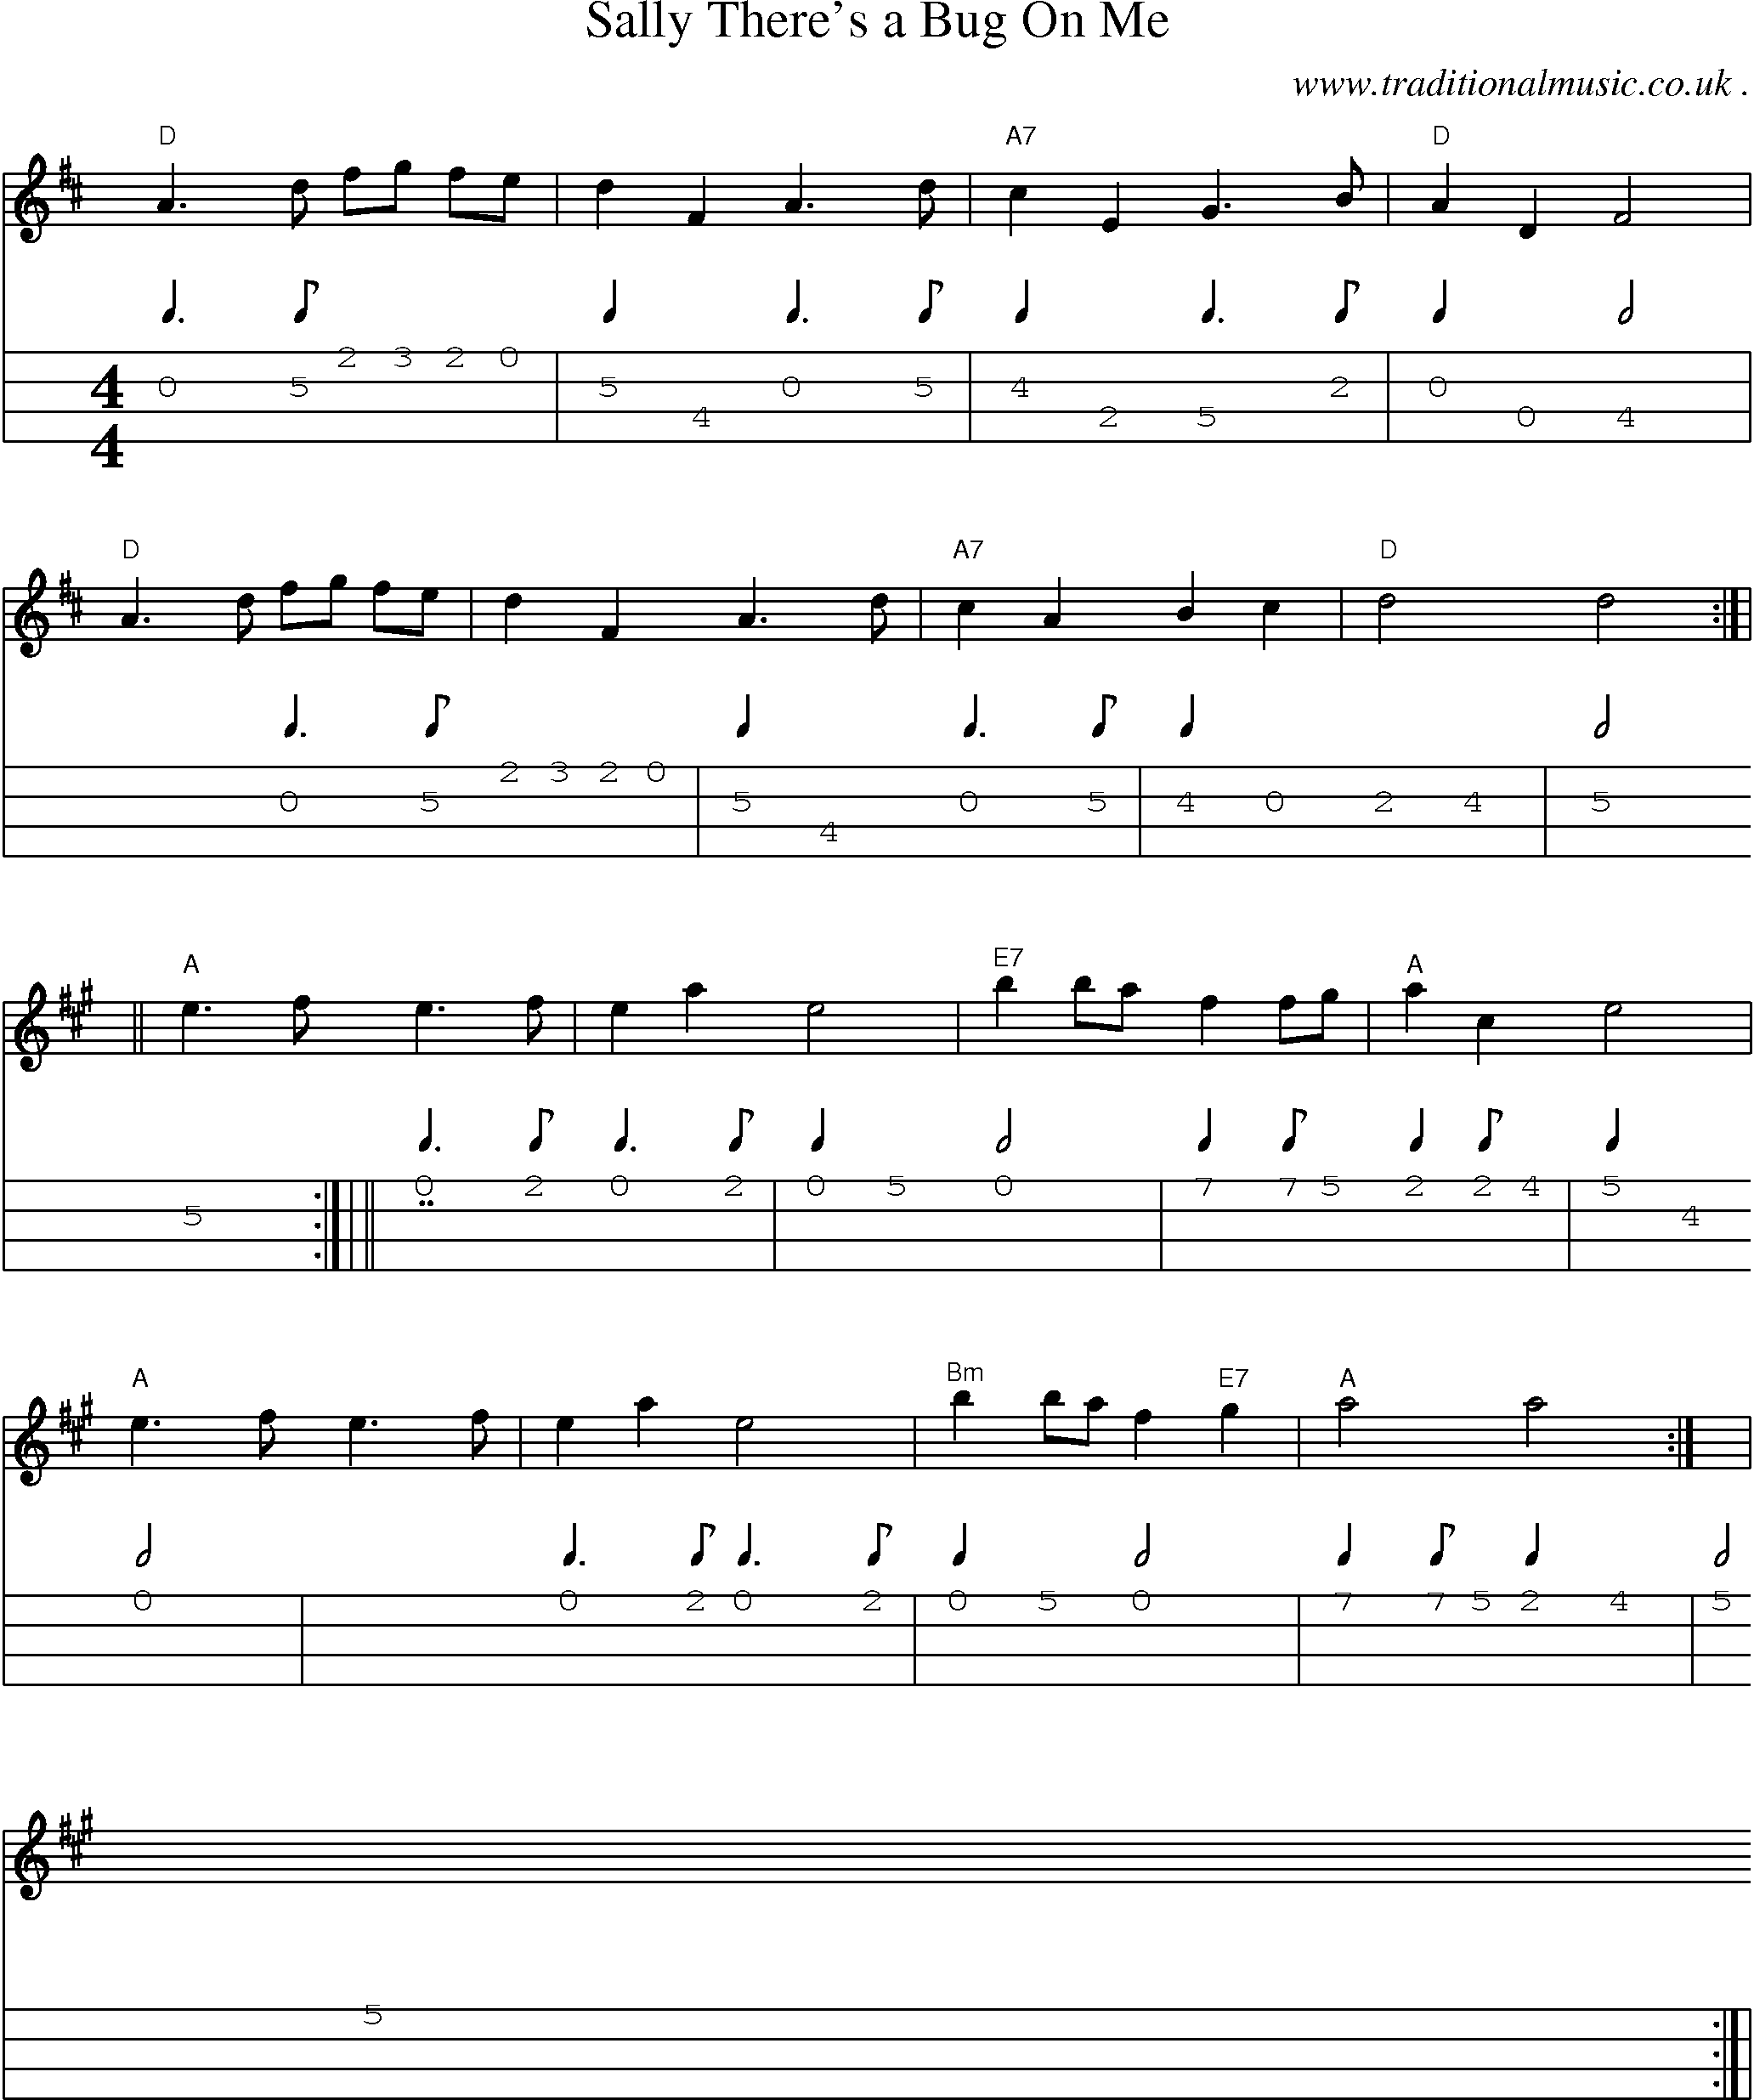 Sheet-music  score, Chords and Mandolin Tabs for Sally Theres A Bug On Me